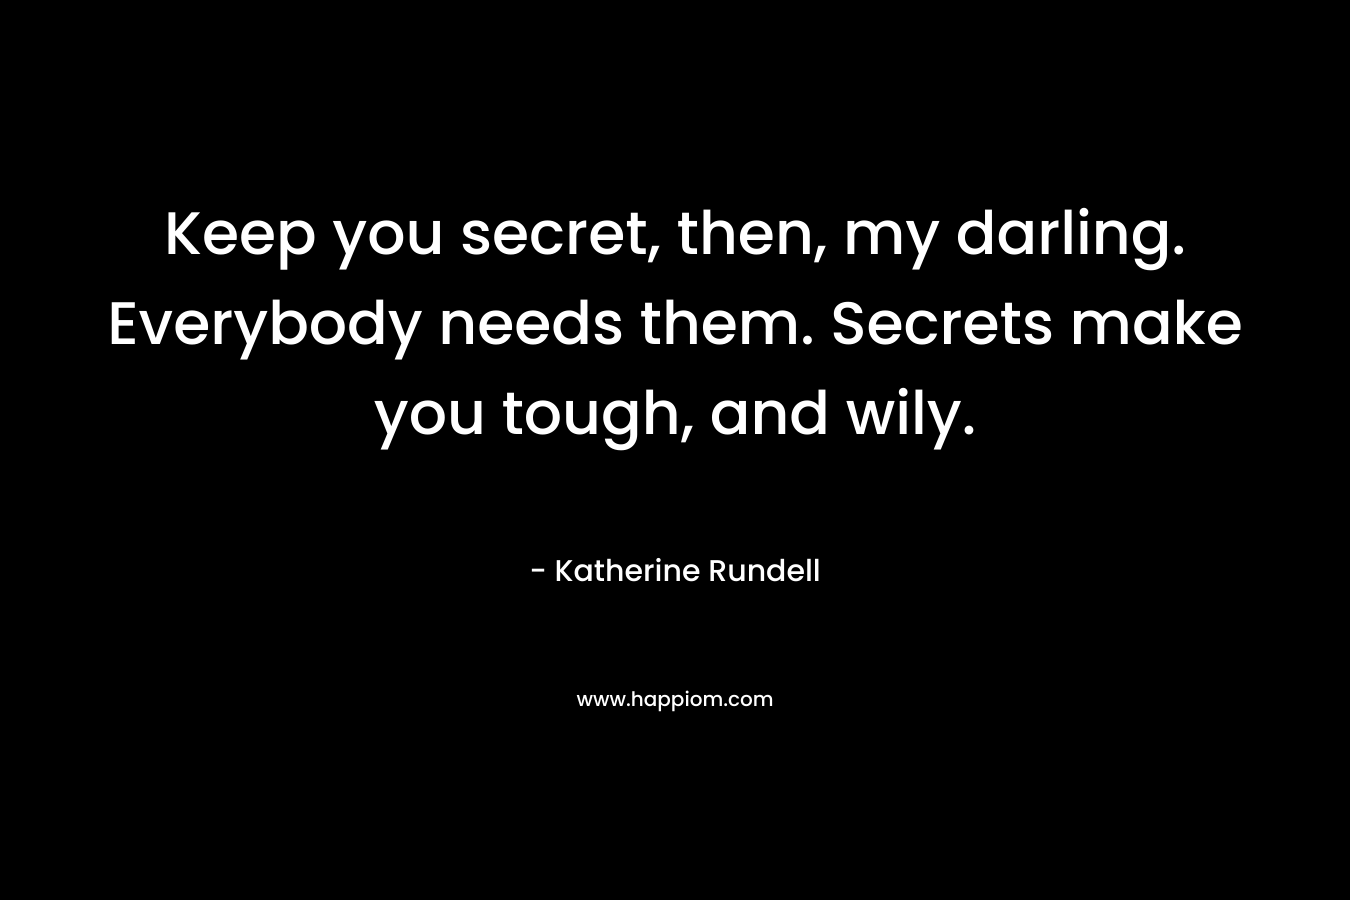 Keep you secret, then, my darling. Everybody needs them. Secrets make you tough, and wily. – Katherine Rundell